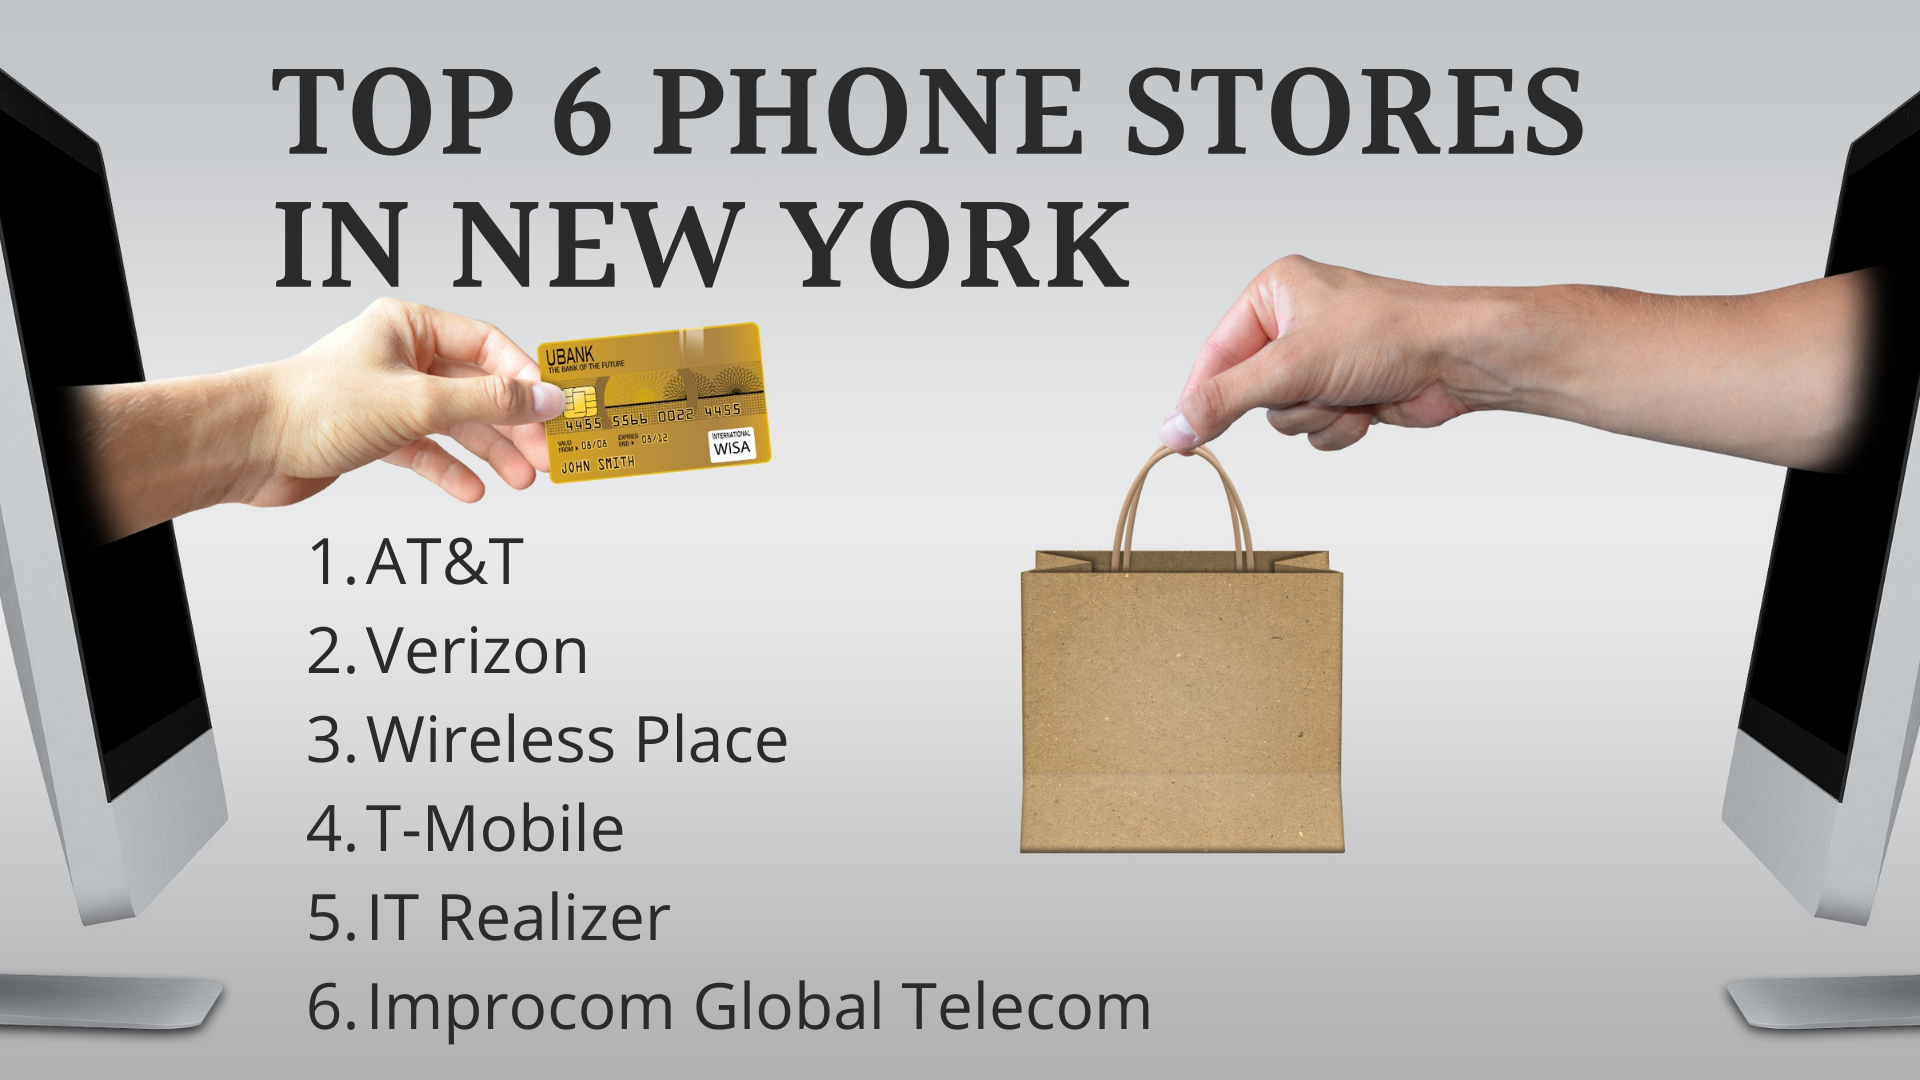 Top 6 phone stores in new york